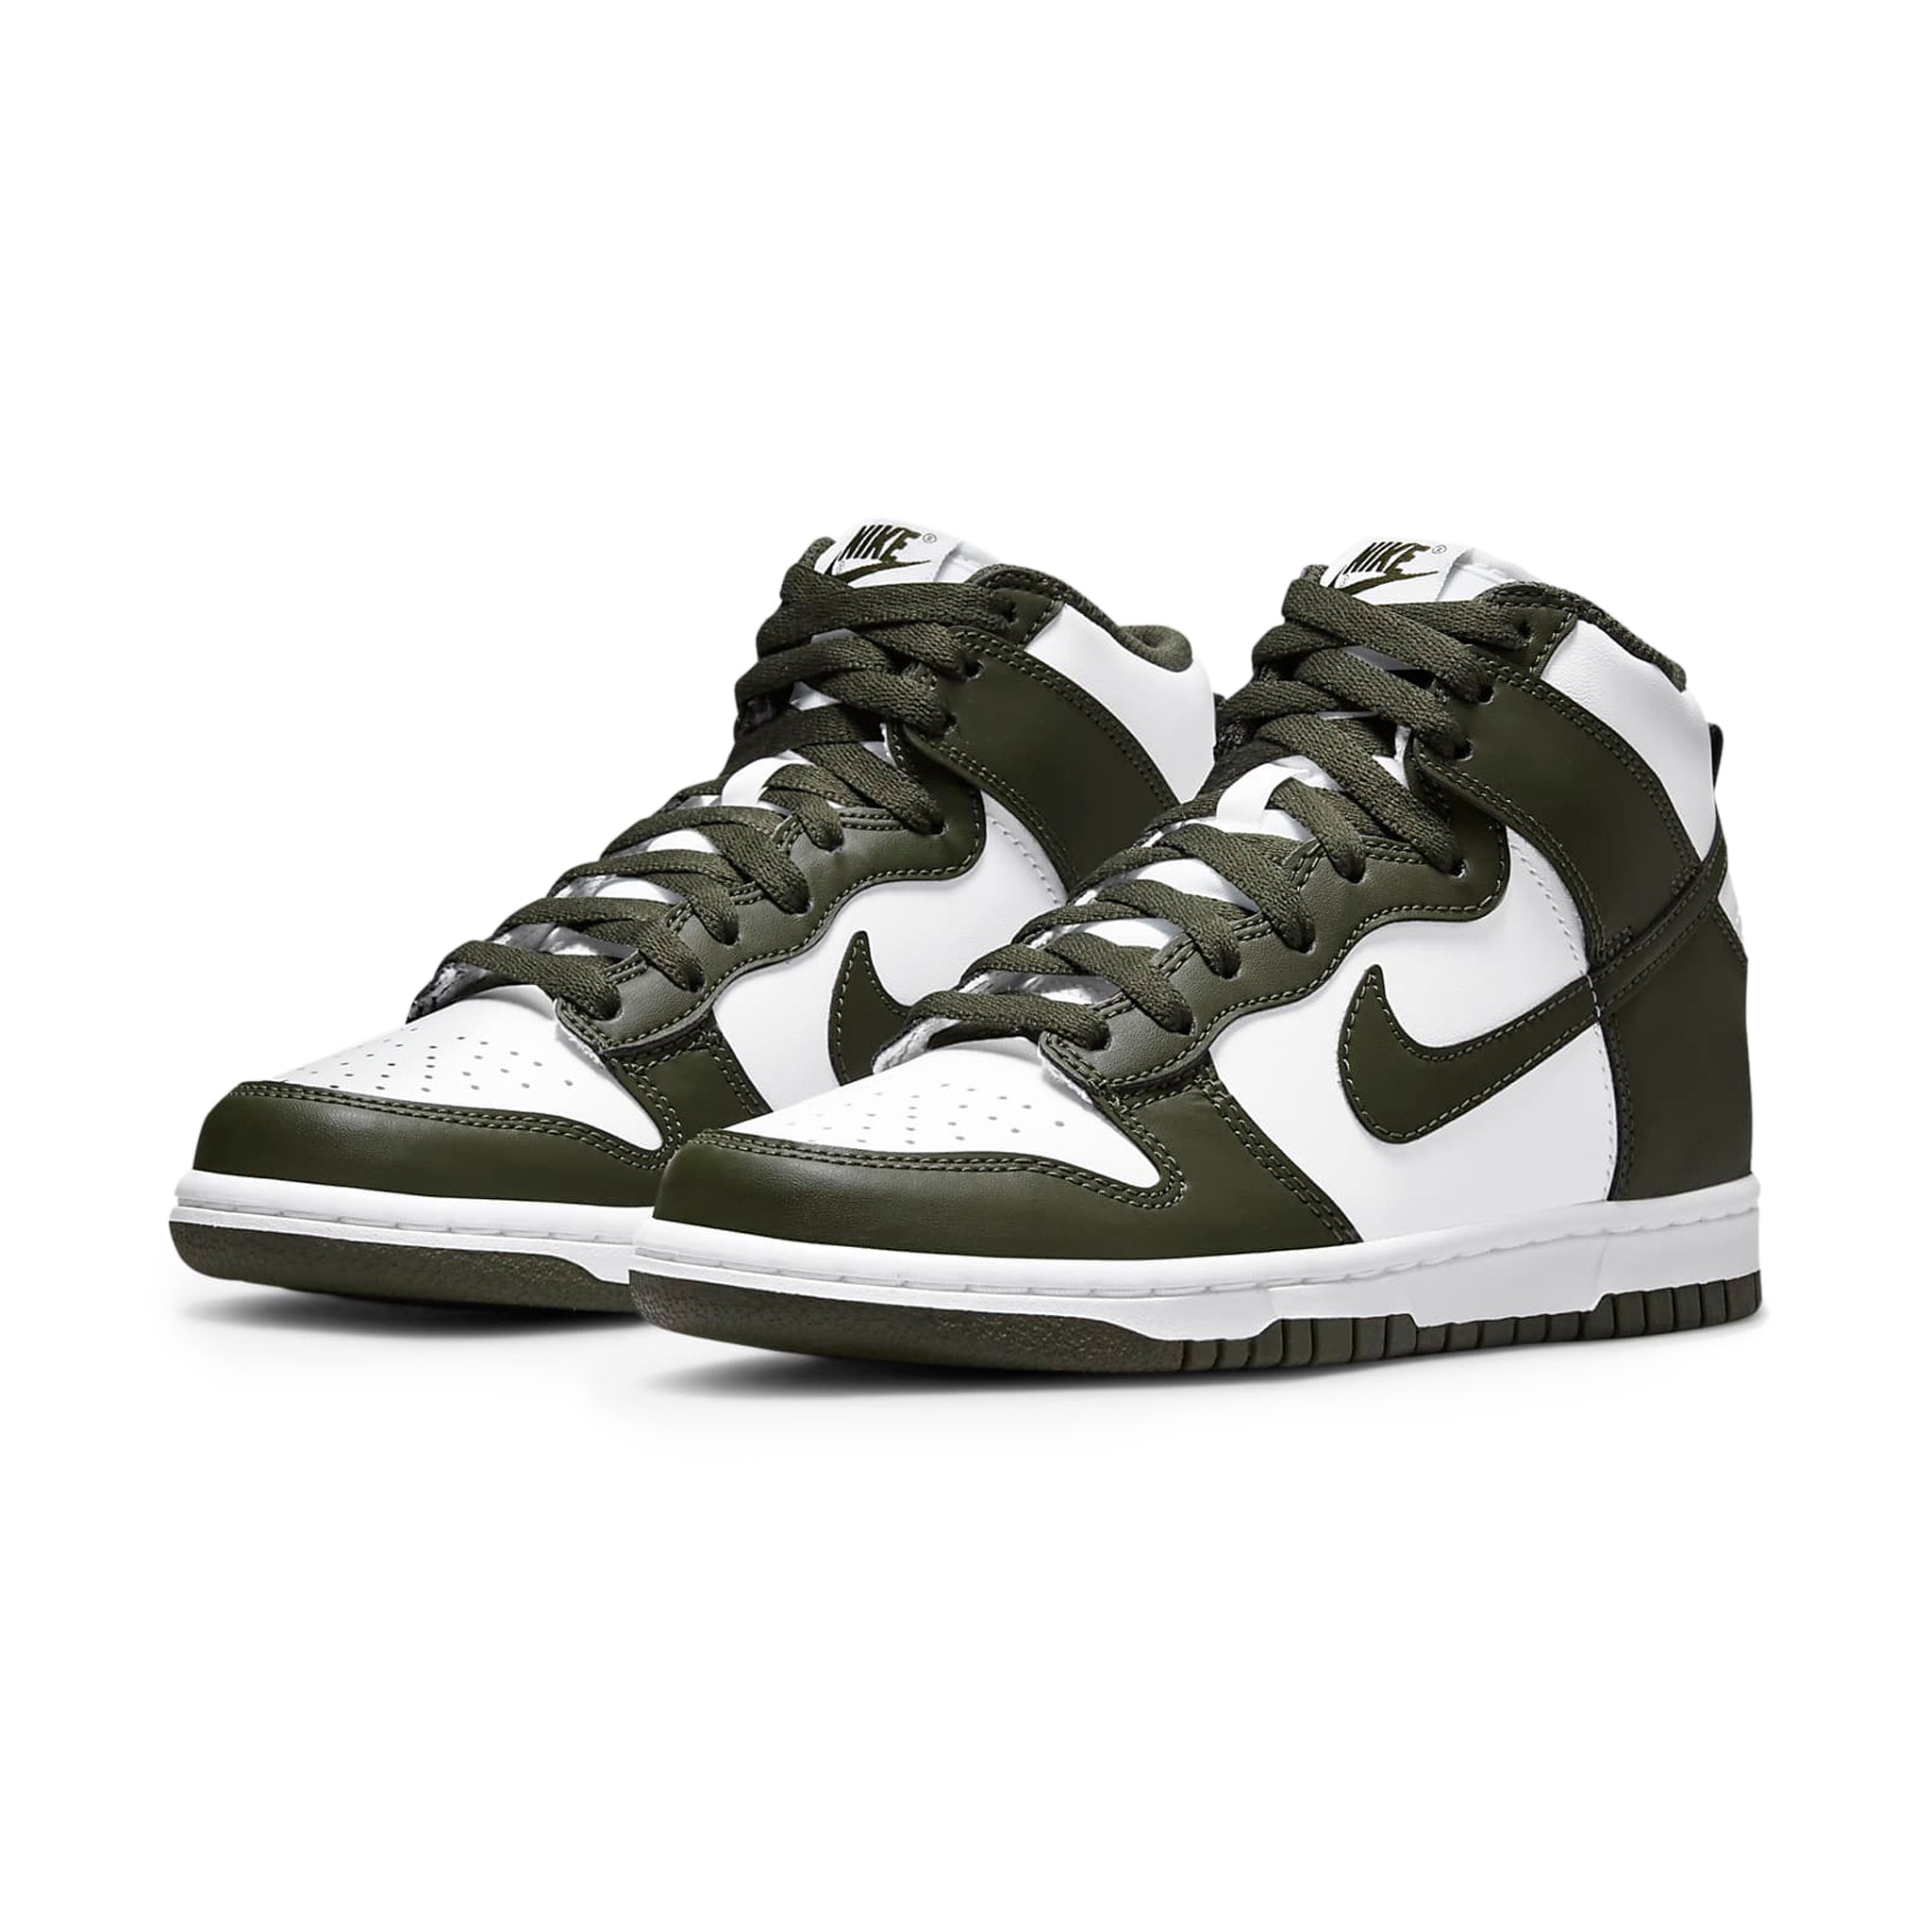 Front side view of Nike Dunk High Cargo Khaki (GS) DB2179-105